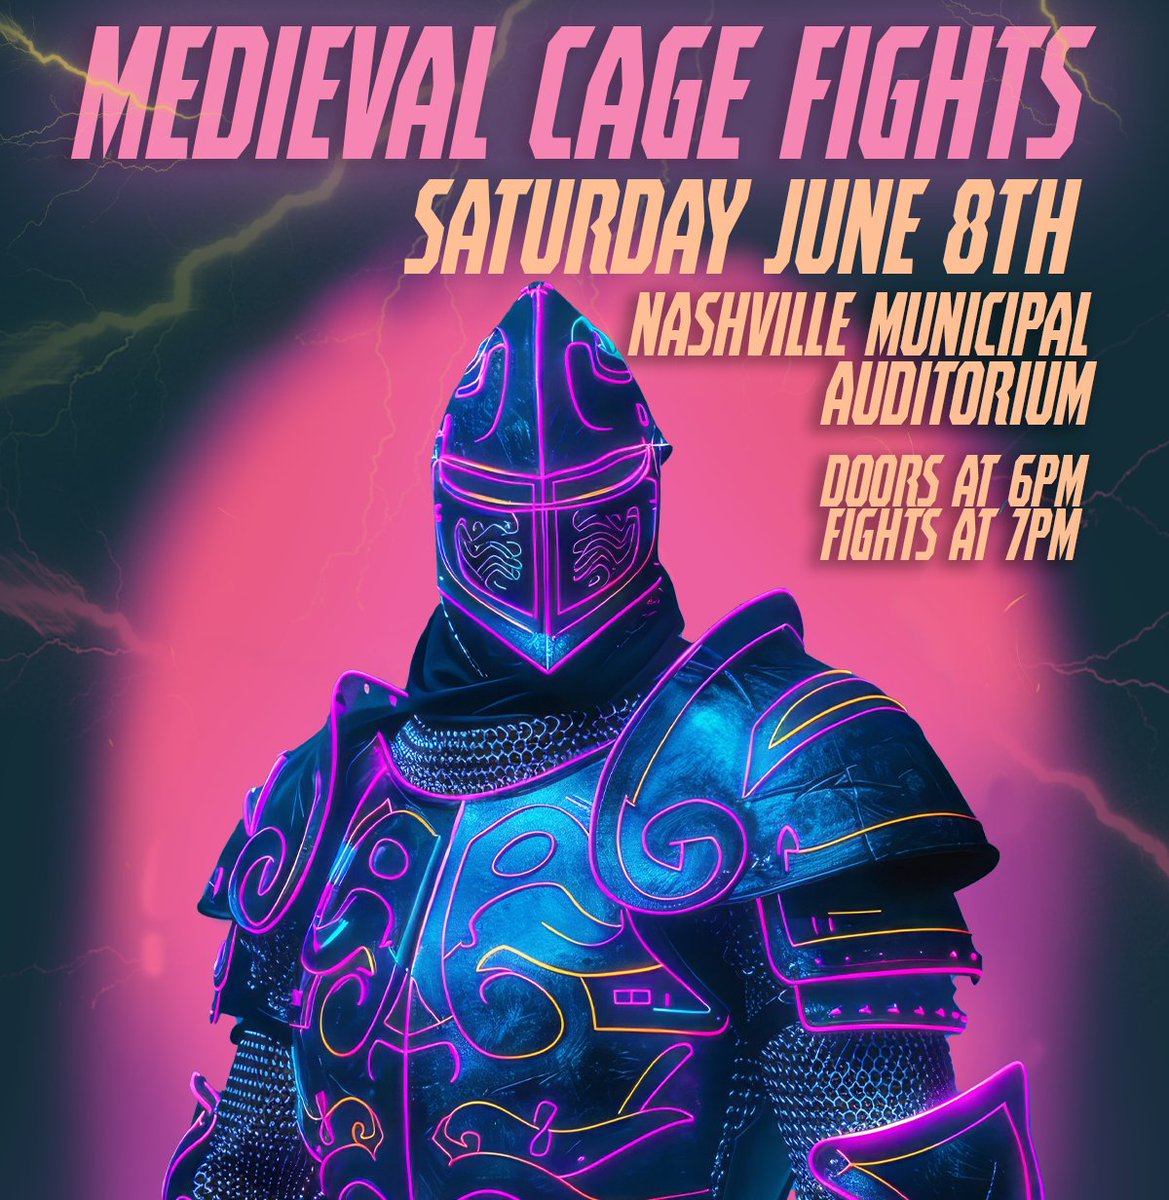 Armored MMA is proud to present the Medieval Cage Fights, which will take place at the Nashville Municipal Auditorium on June 8, 2024! Tickets are now available! For more info, or to purchase tickets, please visit: armoredmma.com